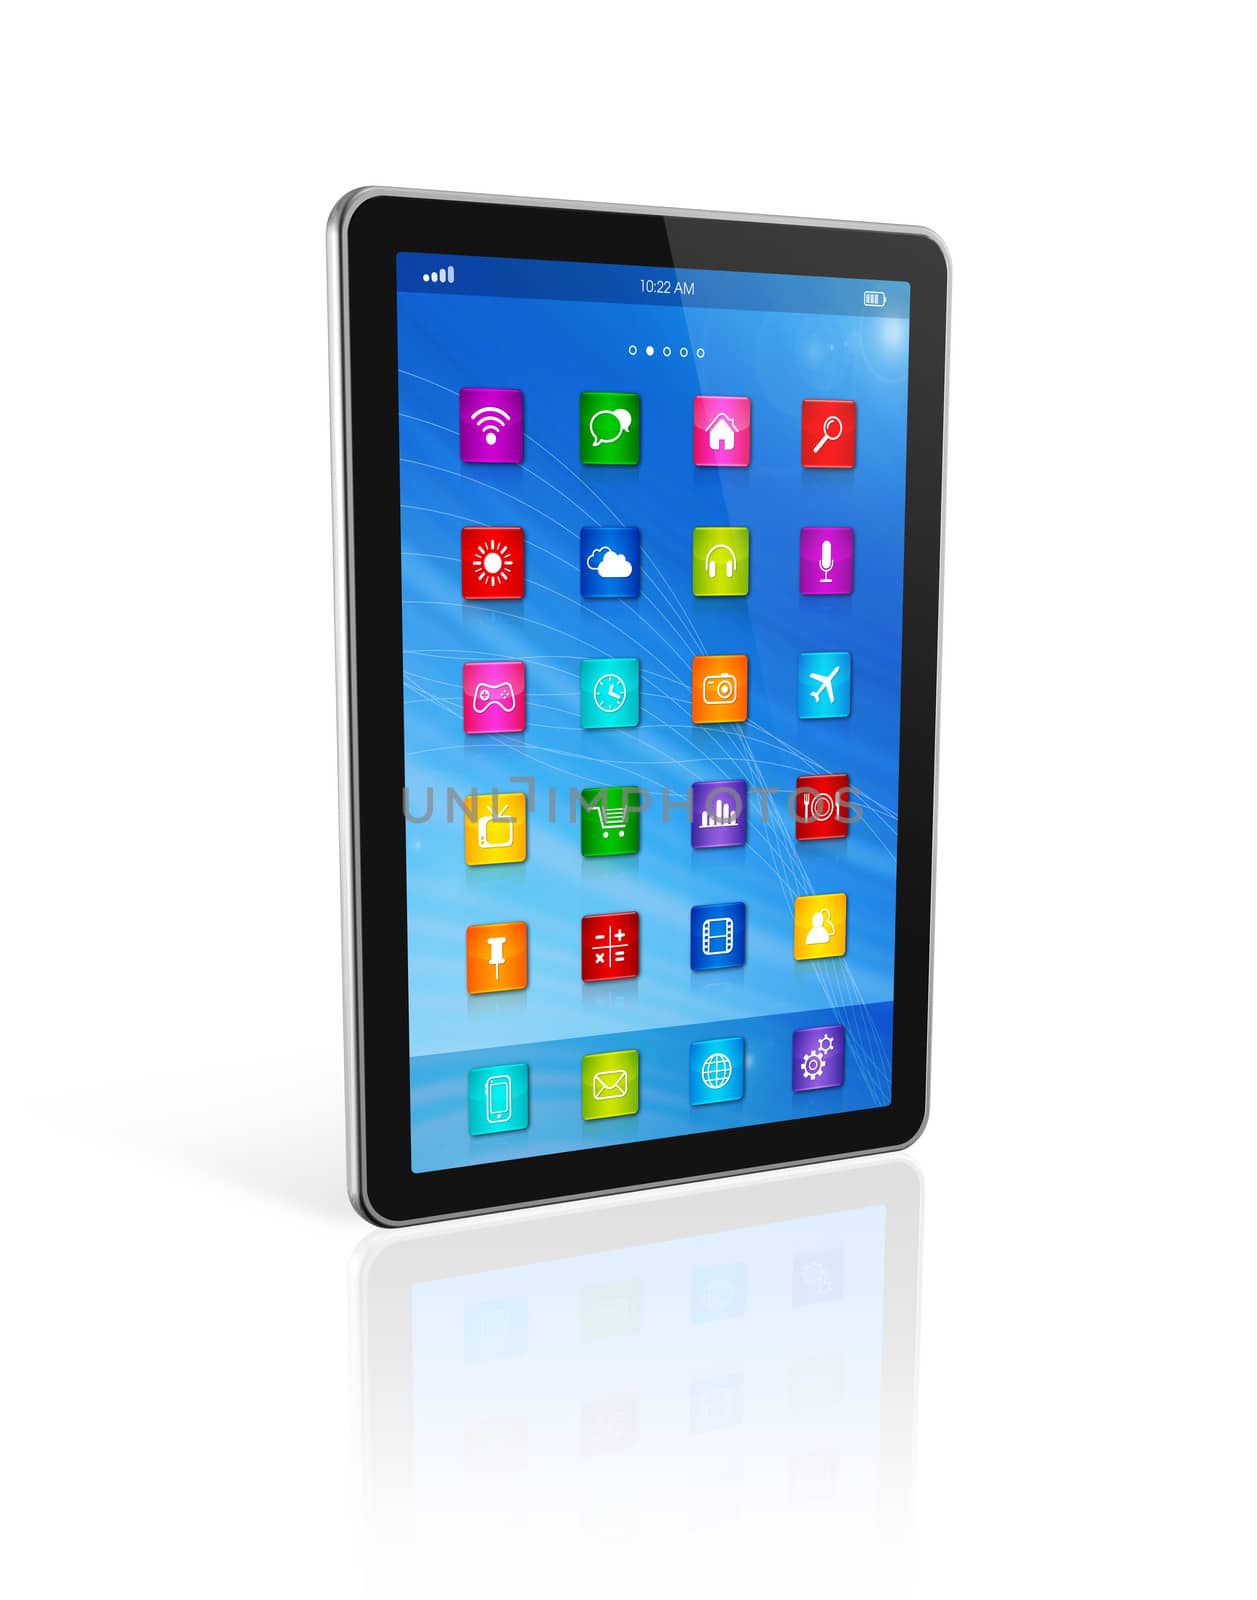 Digital Tablet Computer - apps icons interface by daboost